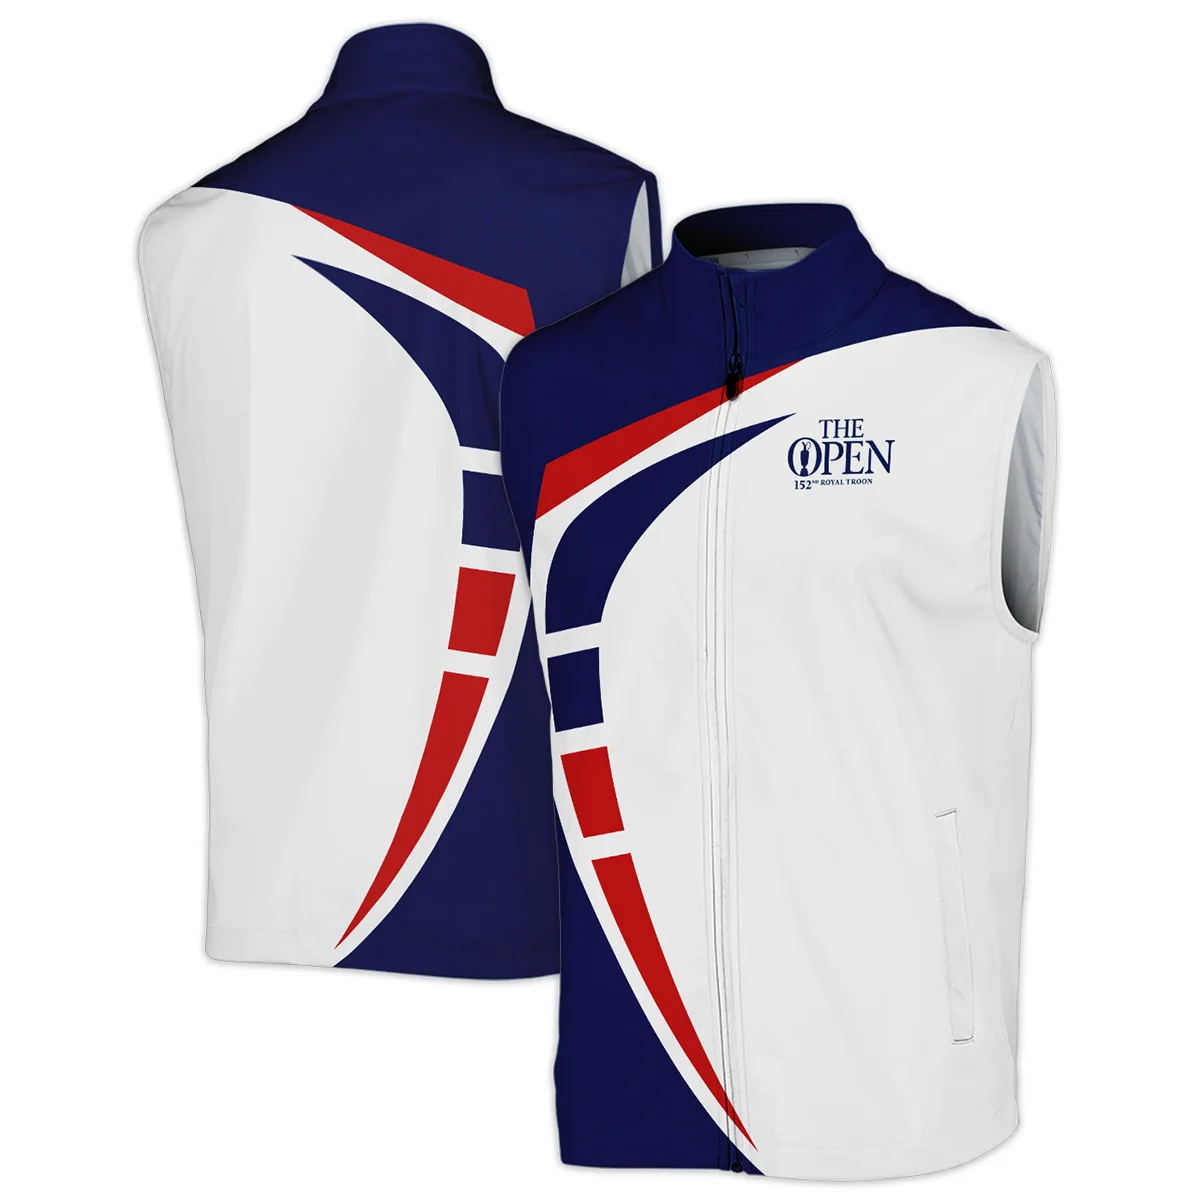 152nd Open Championship Callaway White Blue Red Pattern Background Performance Quarter Zip Sweatshirt With Pockets All Over Prints HOTOP270624A03CLWTS